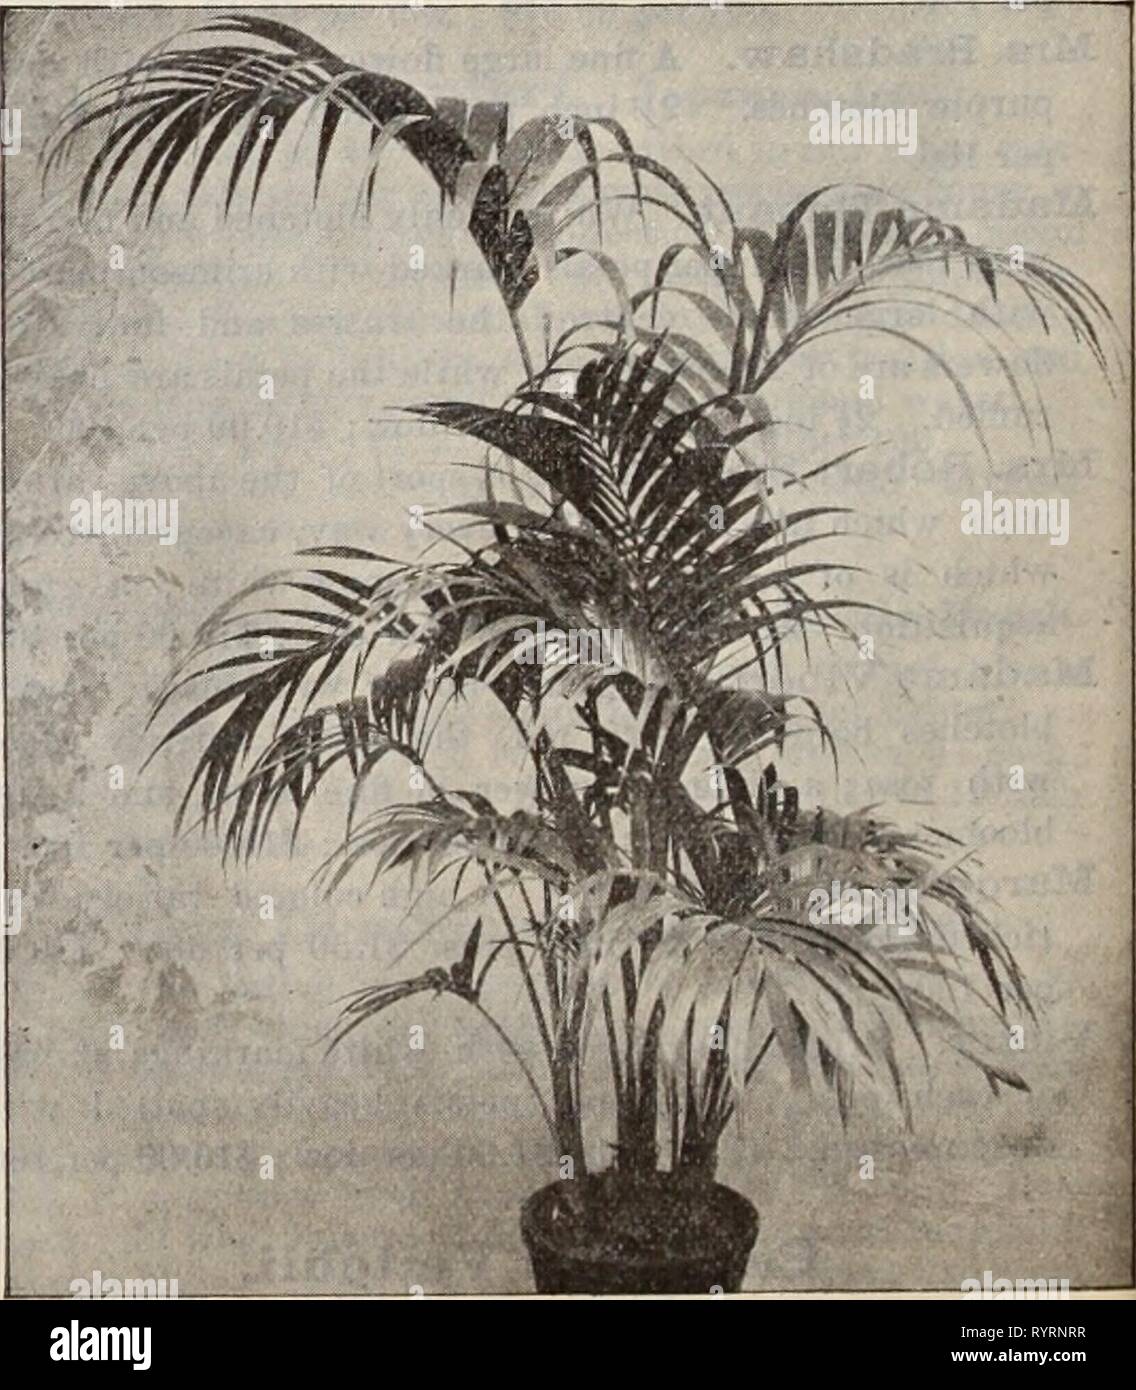 Dreer's wholesale price list  Dreer's wholesale price list / Henry A. Dreer. . dreerswholesalep1898dree Year:   Areca Ldtkscens. Areca Lutescens. We offer a fine lot of clean thrifty plants of this graceful and popular variety. Inch pots. Height. Per doz. Per 100 Per 1000 2 $ I 00 $ 6 00 $50 00 3 (2 plants in a pot.) 12 to 15 ins. I 25 10 00 90 00 5 20 to 24 ' 6 00 50 00 6 Very bushy. 28 to 30 ' 12 00 100 00 Each. Dozen. y a it 32 to 36 ' I 50 18 00 8 ' 36 to 42 ' 2 50 30 00 8 ' 42 to 48 ' 3 00 36 00 9 Heavy single plants. 48 to 60 ' 6 00 Caryota LIrens. (Fish Tail Palm.) 2^ inch pots, $1.00 p Stock Photo